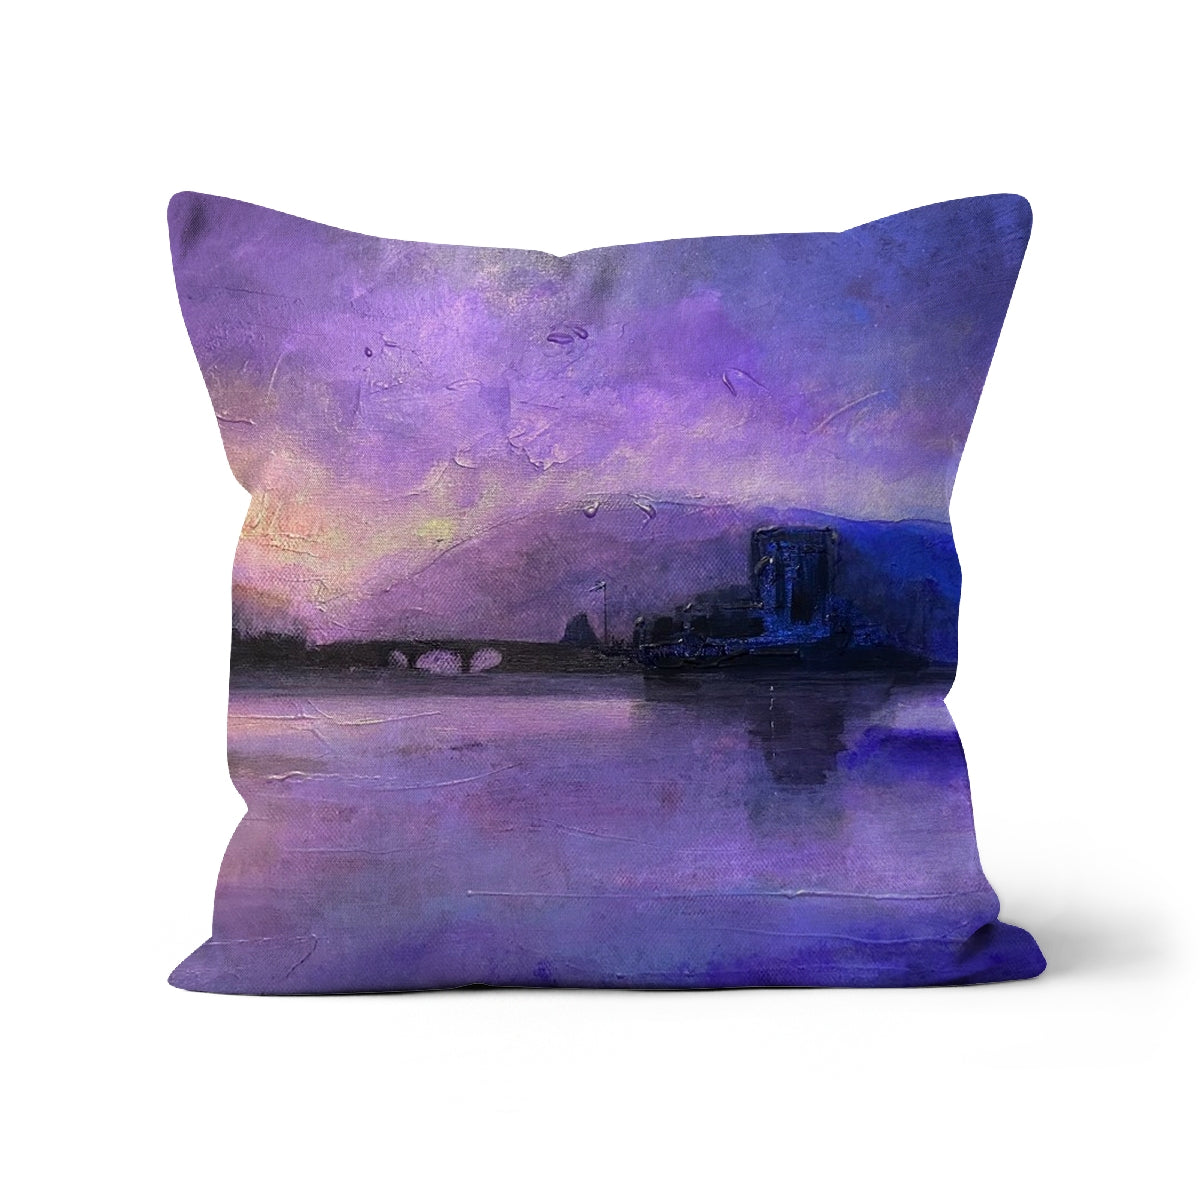 Eilean Donan Castle Moonset Art Gifts Cushion-Cushions-Historic & Iconic Scotland Art Gallery-Faux Suede-16"x16"-Paintings, Prints, Homeware, Art Gifts From Scotland By Scottish Artist Kevin Hunter